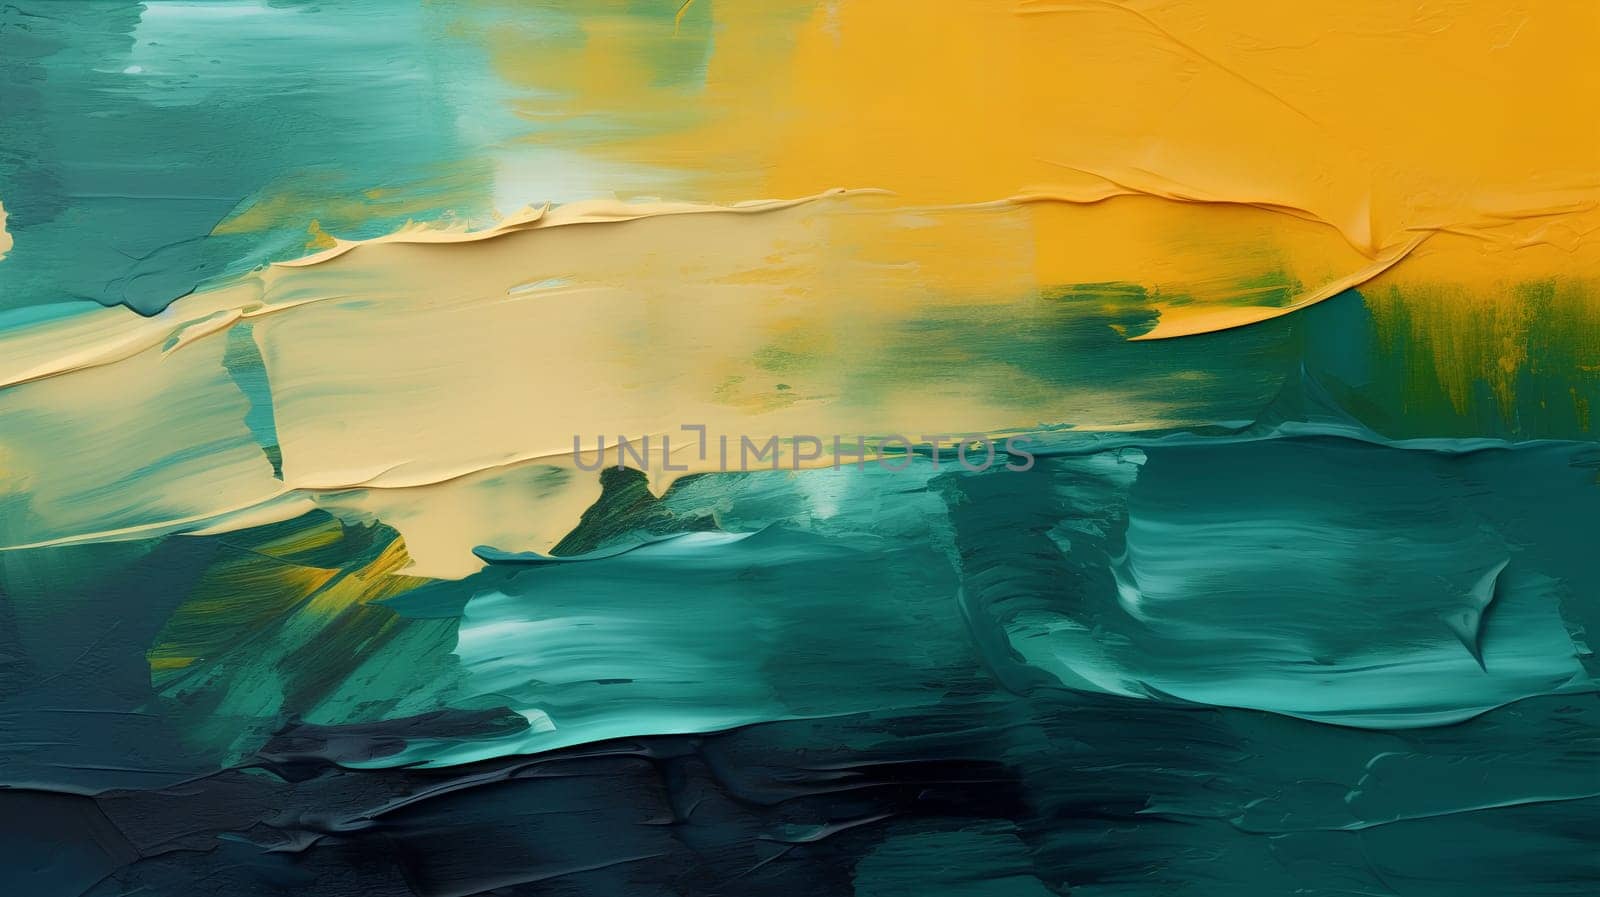 Abstract smudged grunge-style background, hand-painted in brown, green, yellow and dark blue colors by Севостьянов